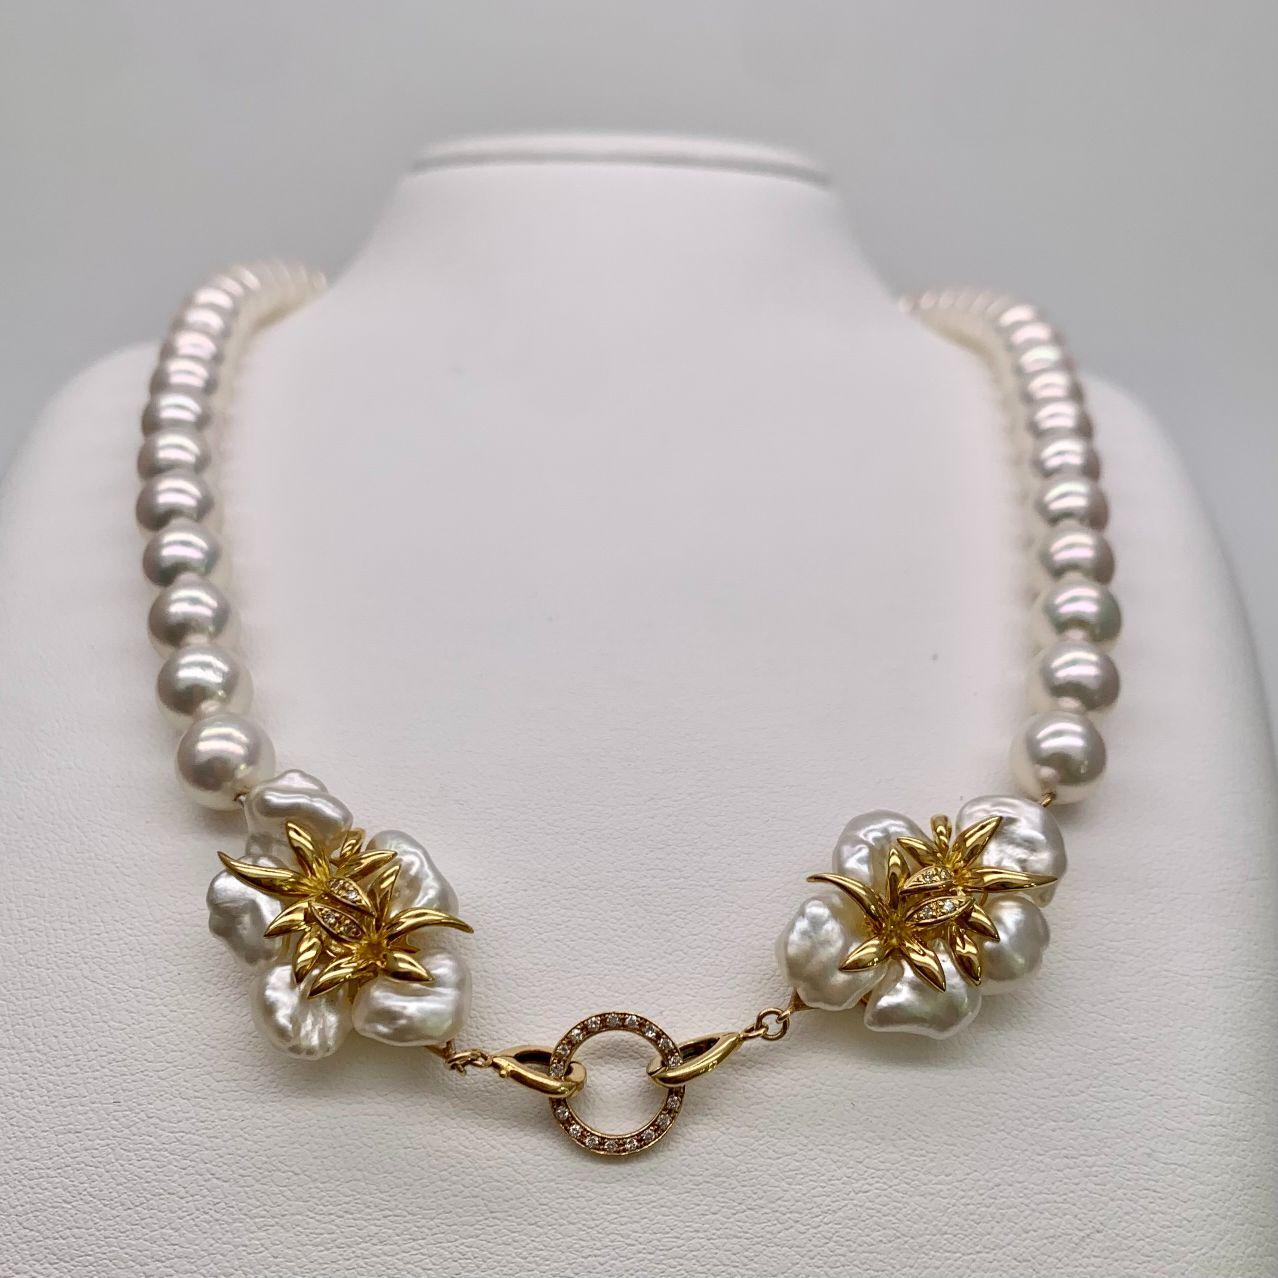 An elegant White Pink Akoya Keshi Pearl Necklace with an 18K Gold ‘Starfish’ set on Keshi Pearls attached to a round 18K Gold Diamond Ring. Evoking strong feelings of love and connection, a versatile piece to be worn on any occasion. An exquisite